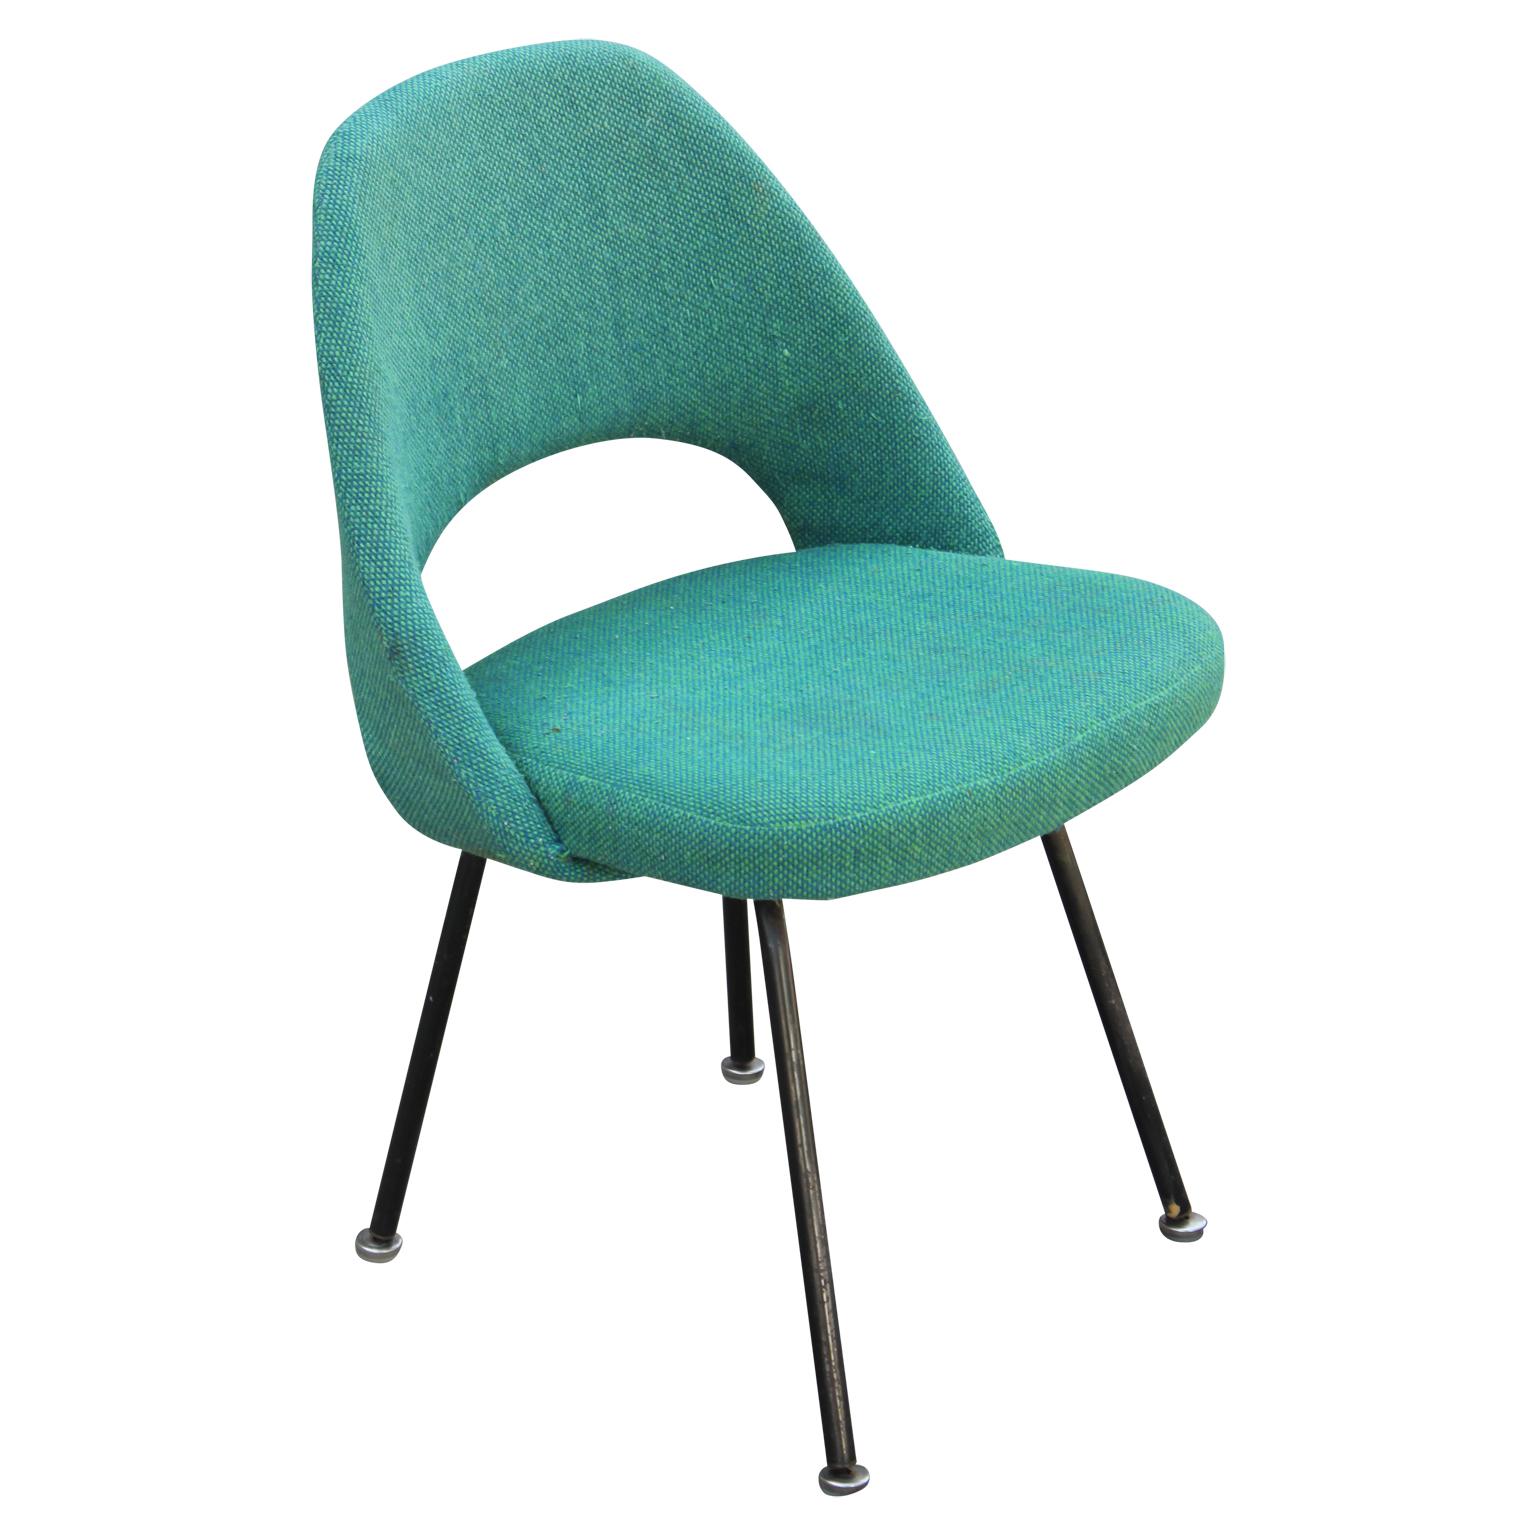 Mid-20th Century Set of Four Modern Eero Saarinen for Knoll Green Armless Executive Side Chairs